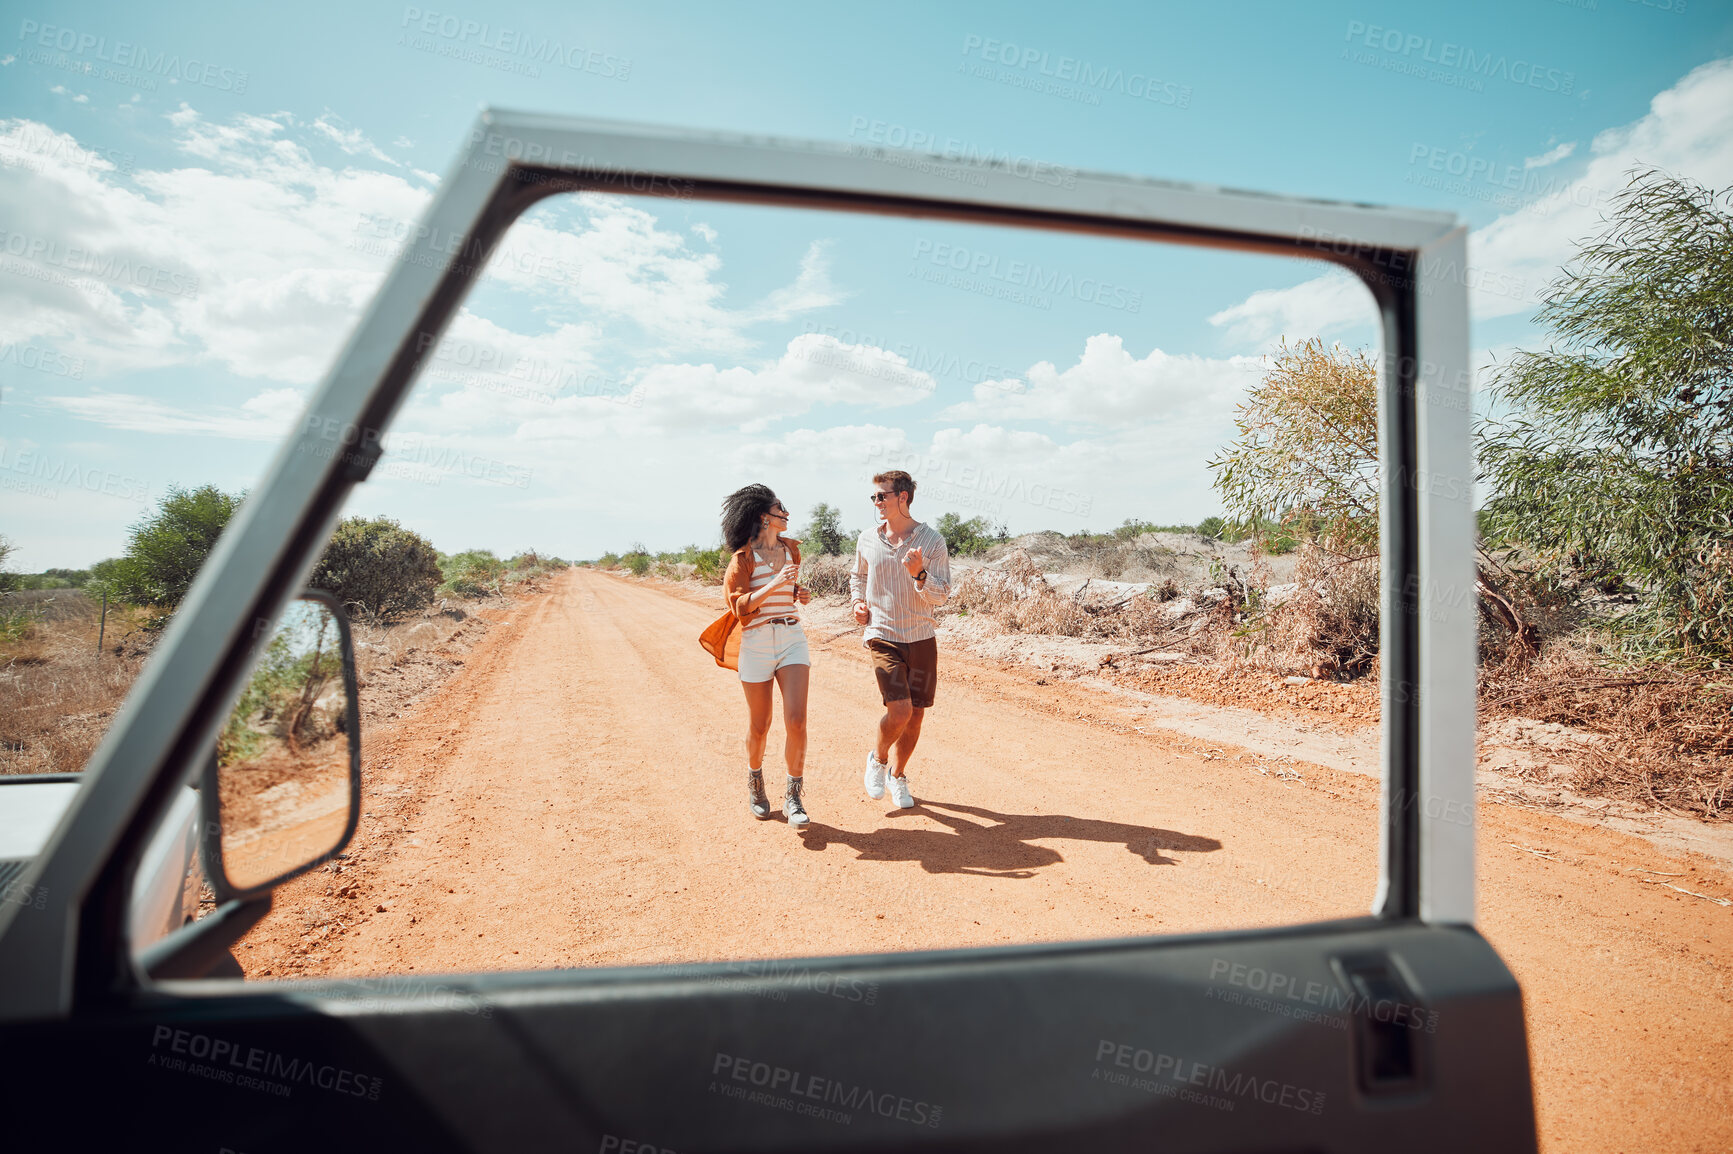 Buy stock photo Couple, safari road trip vacation and adventure wellness vacation or friends bonding trip together. Happy man and woman running, freedom in nature outdoors and fun running in car window view

